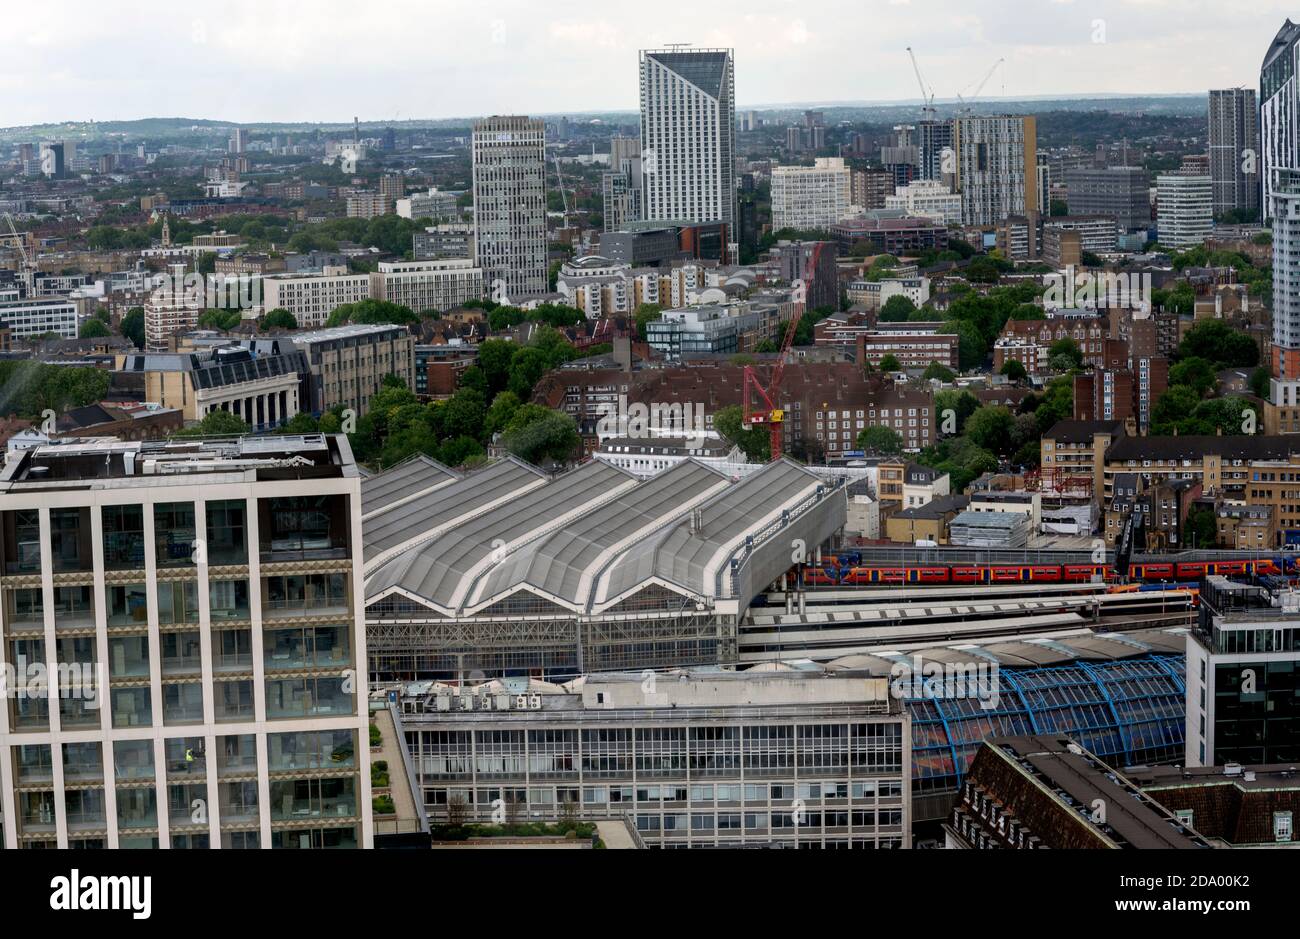 Aerial view over South London including British Rail Waterloo Railway station, London, England, UK. Stock Photo